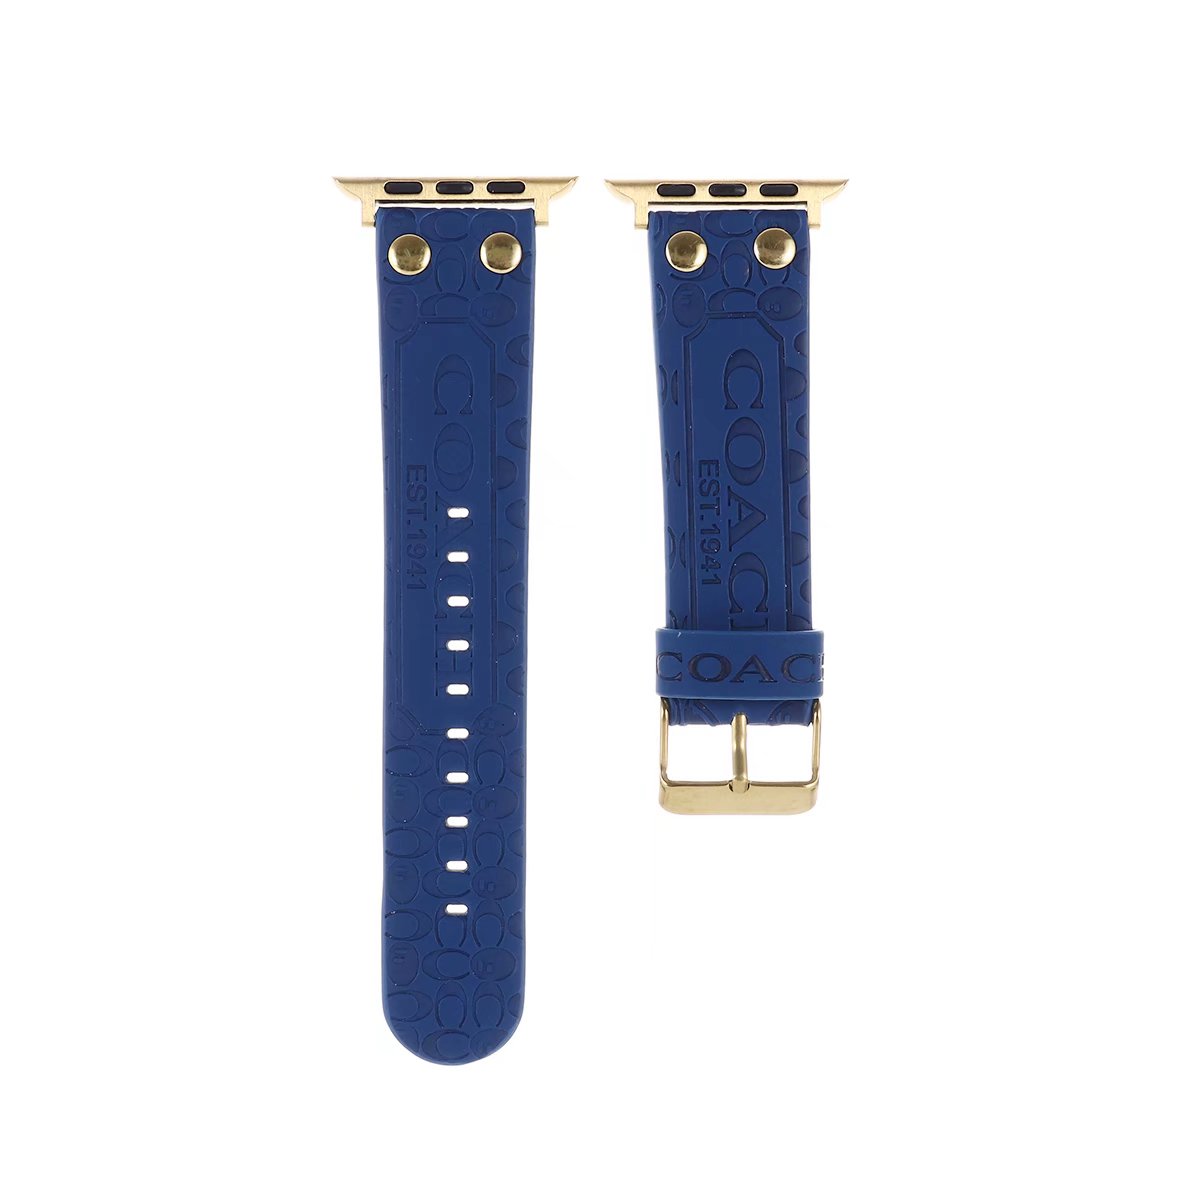 Debossed Coach Watch Band in blue